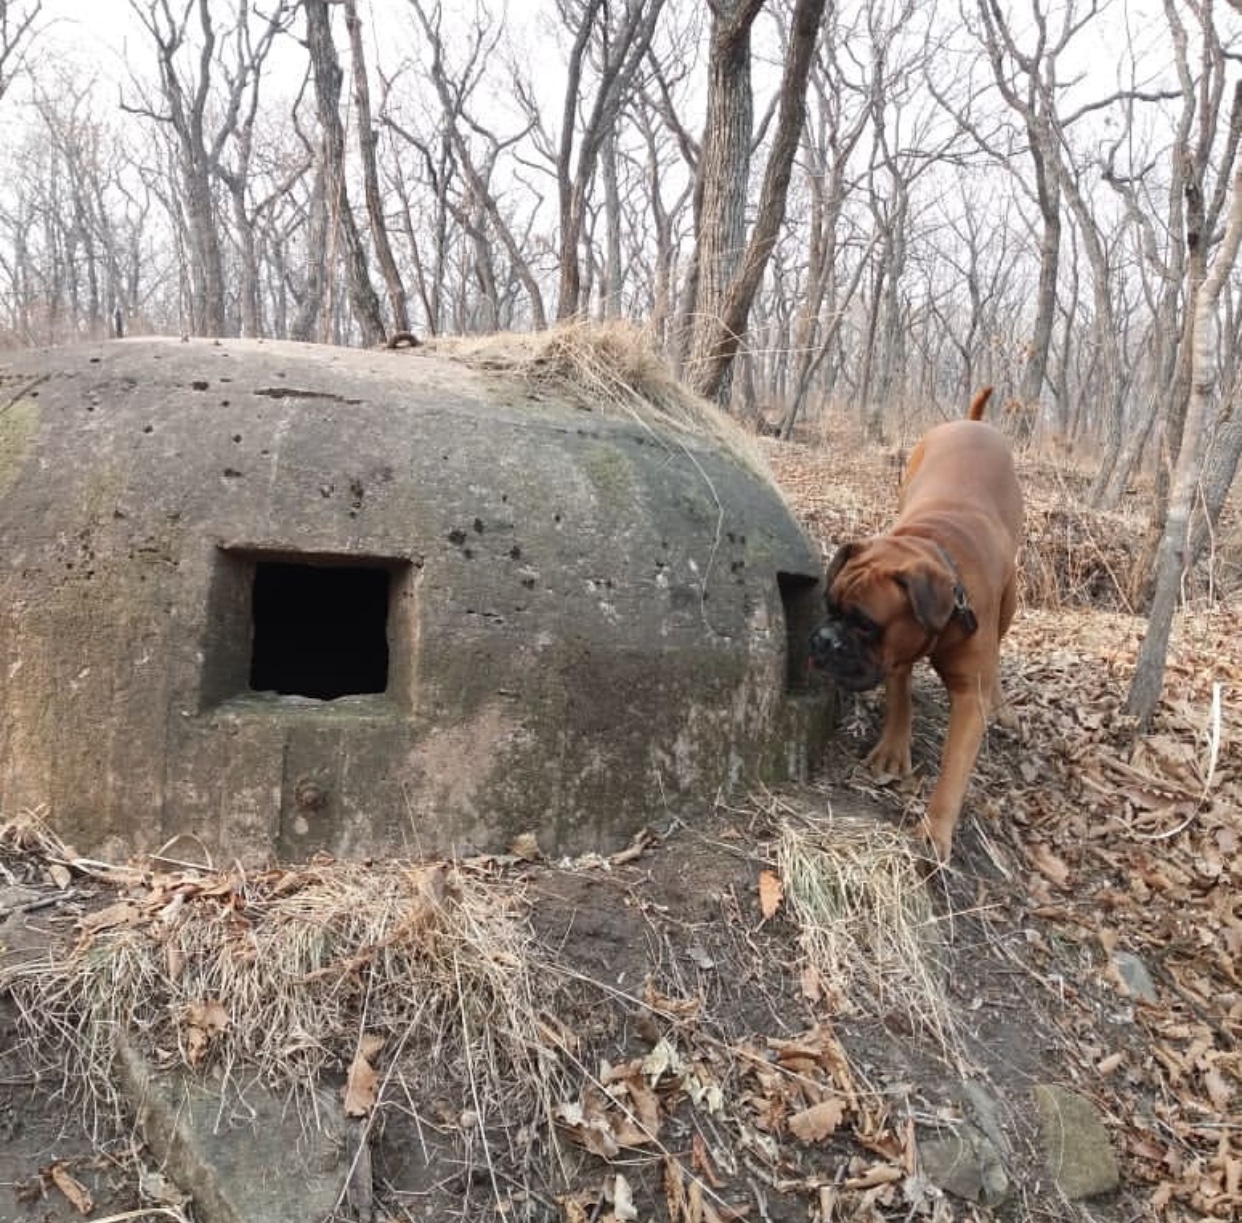 A boxer dog curiously looking at the structure in the forest